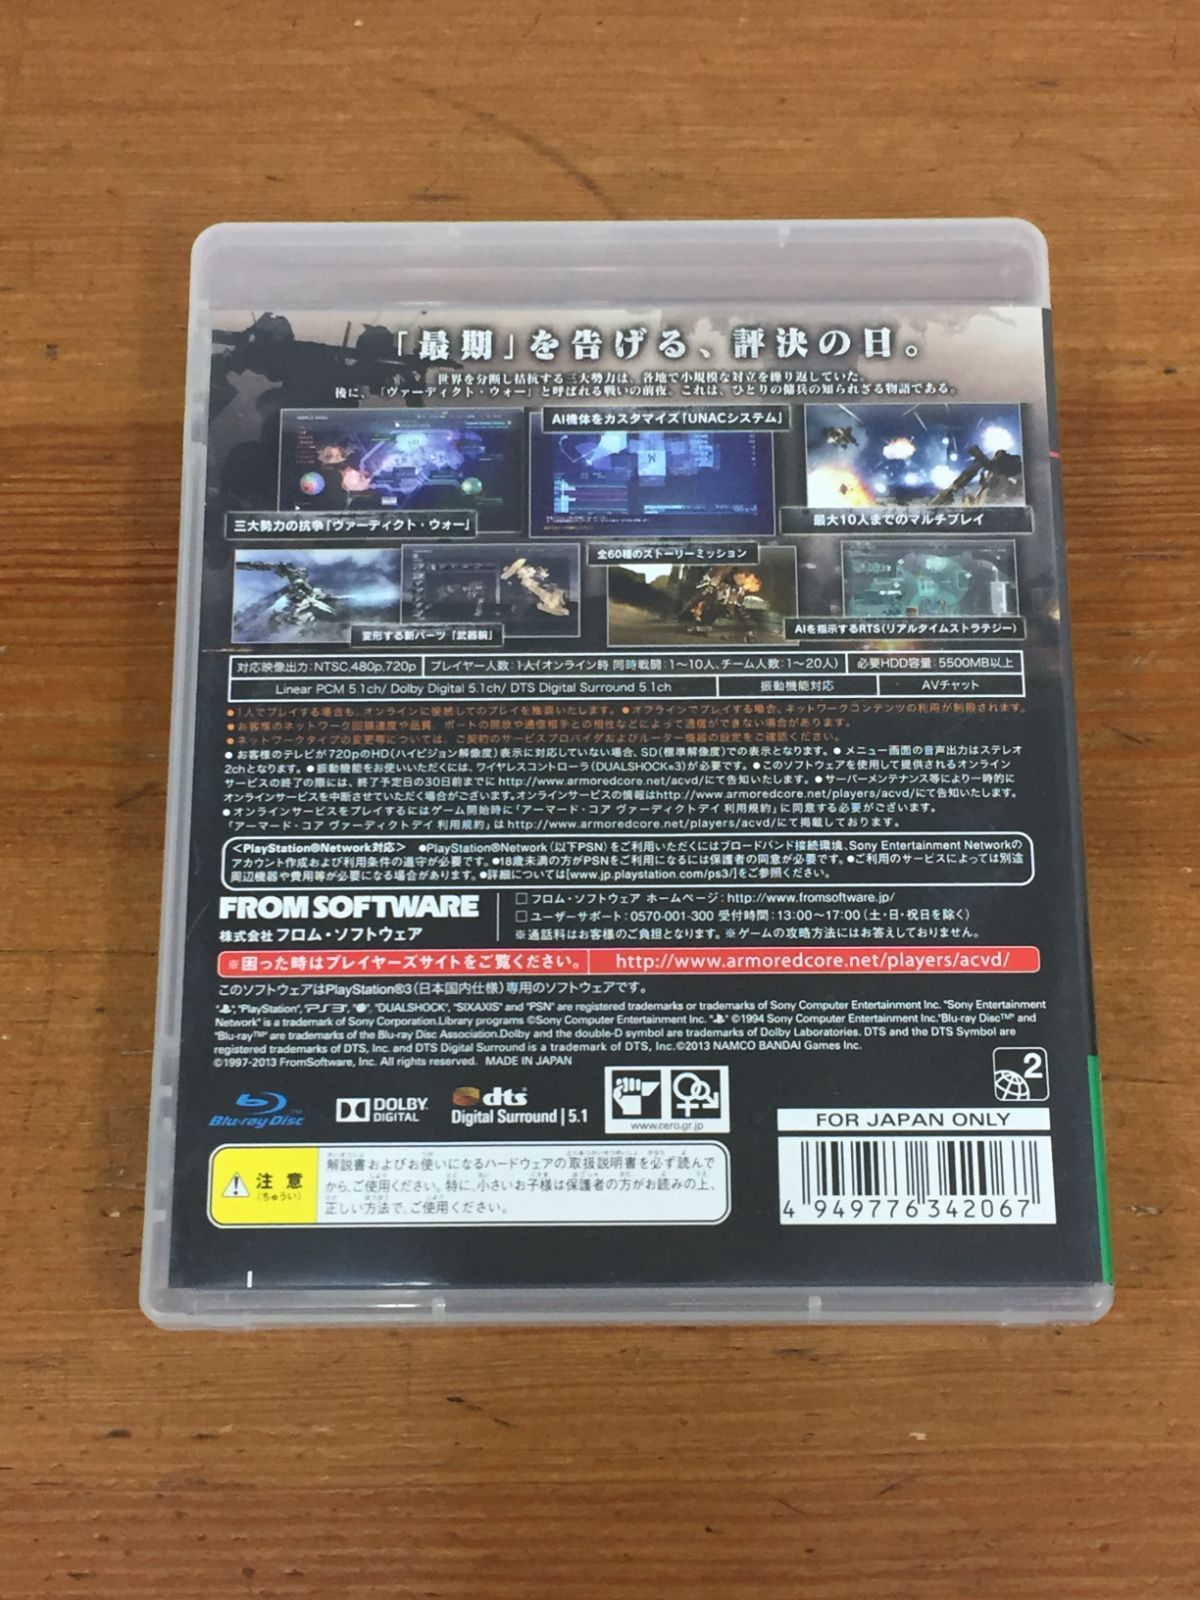 PS3ソフト ARMORED CORE VERDICT DAY アーマード・コア ヴァーディクト